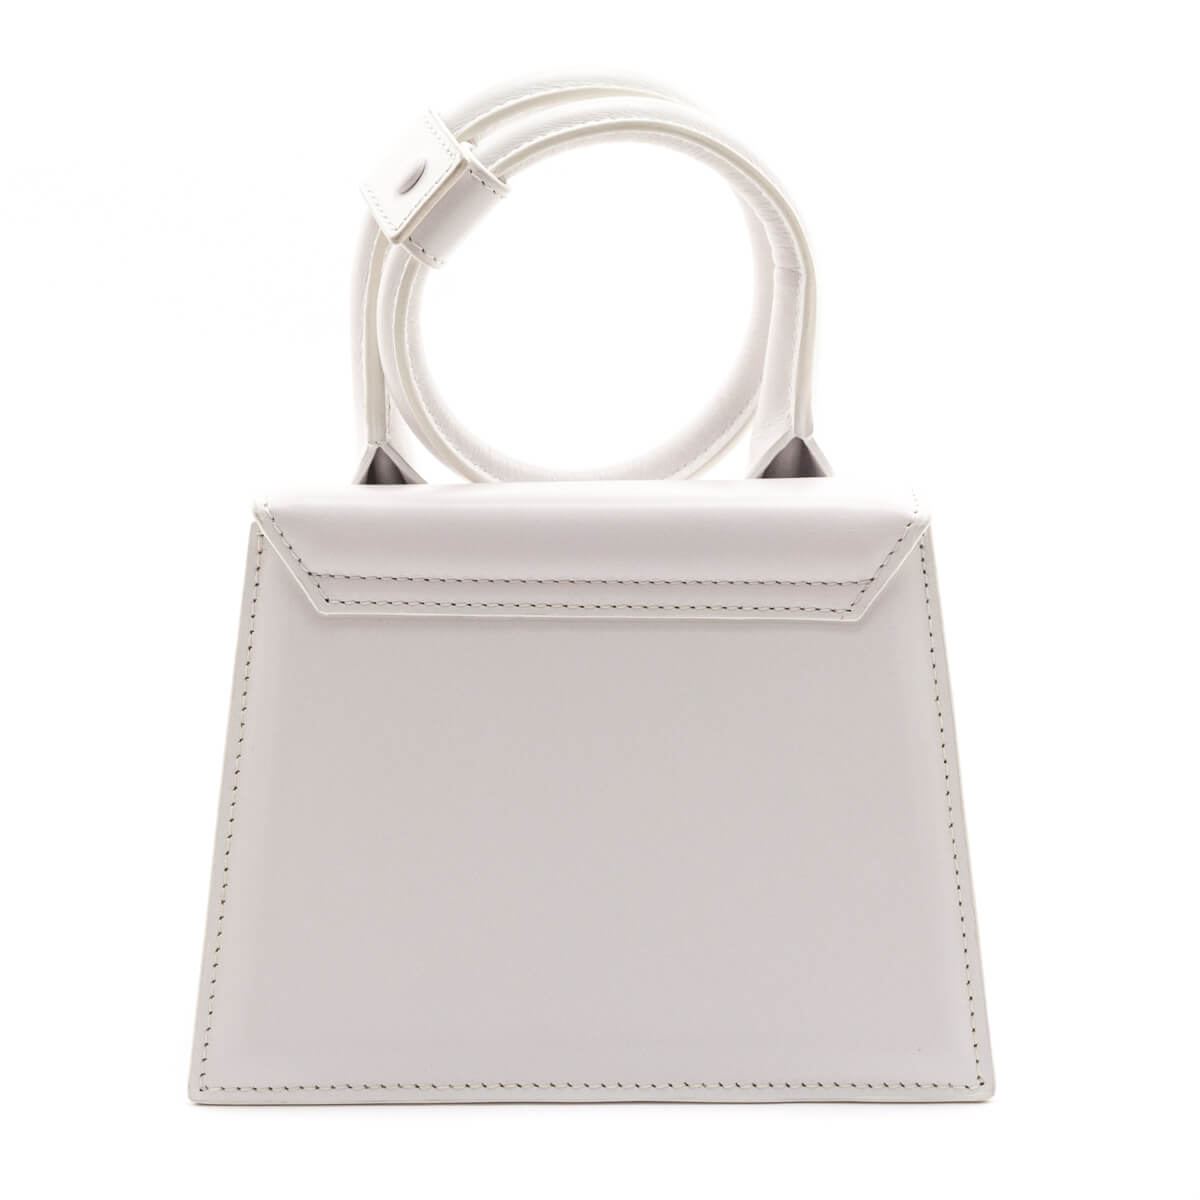 Jacquemus White Le Chiquito Noeud Shoulder Bag - Love that Bag etc - Preowned Authentic Designer Handbags & Preloved Fashions